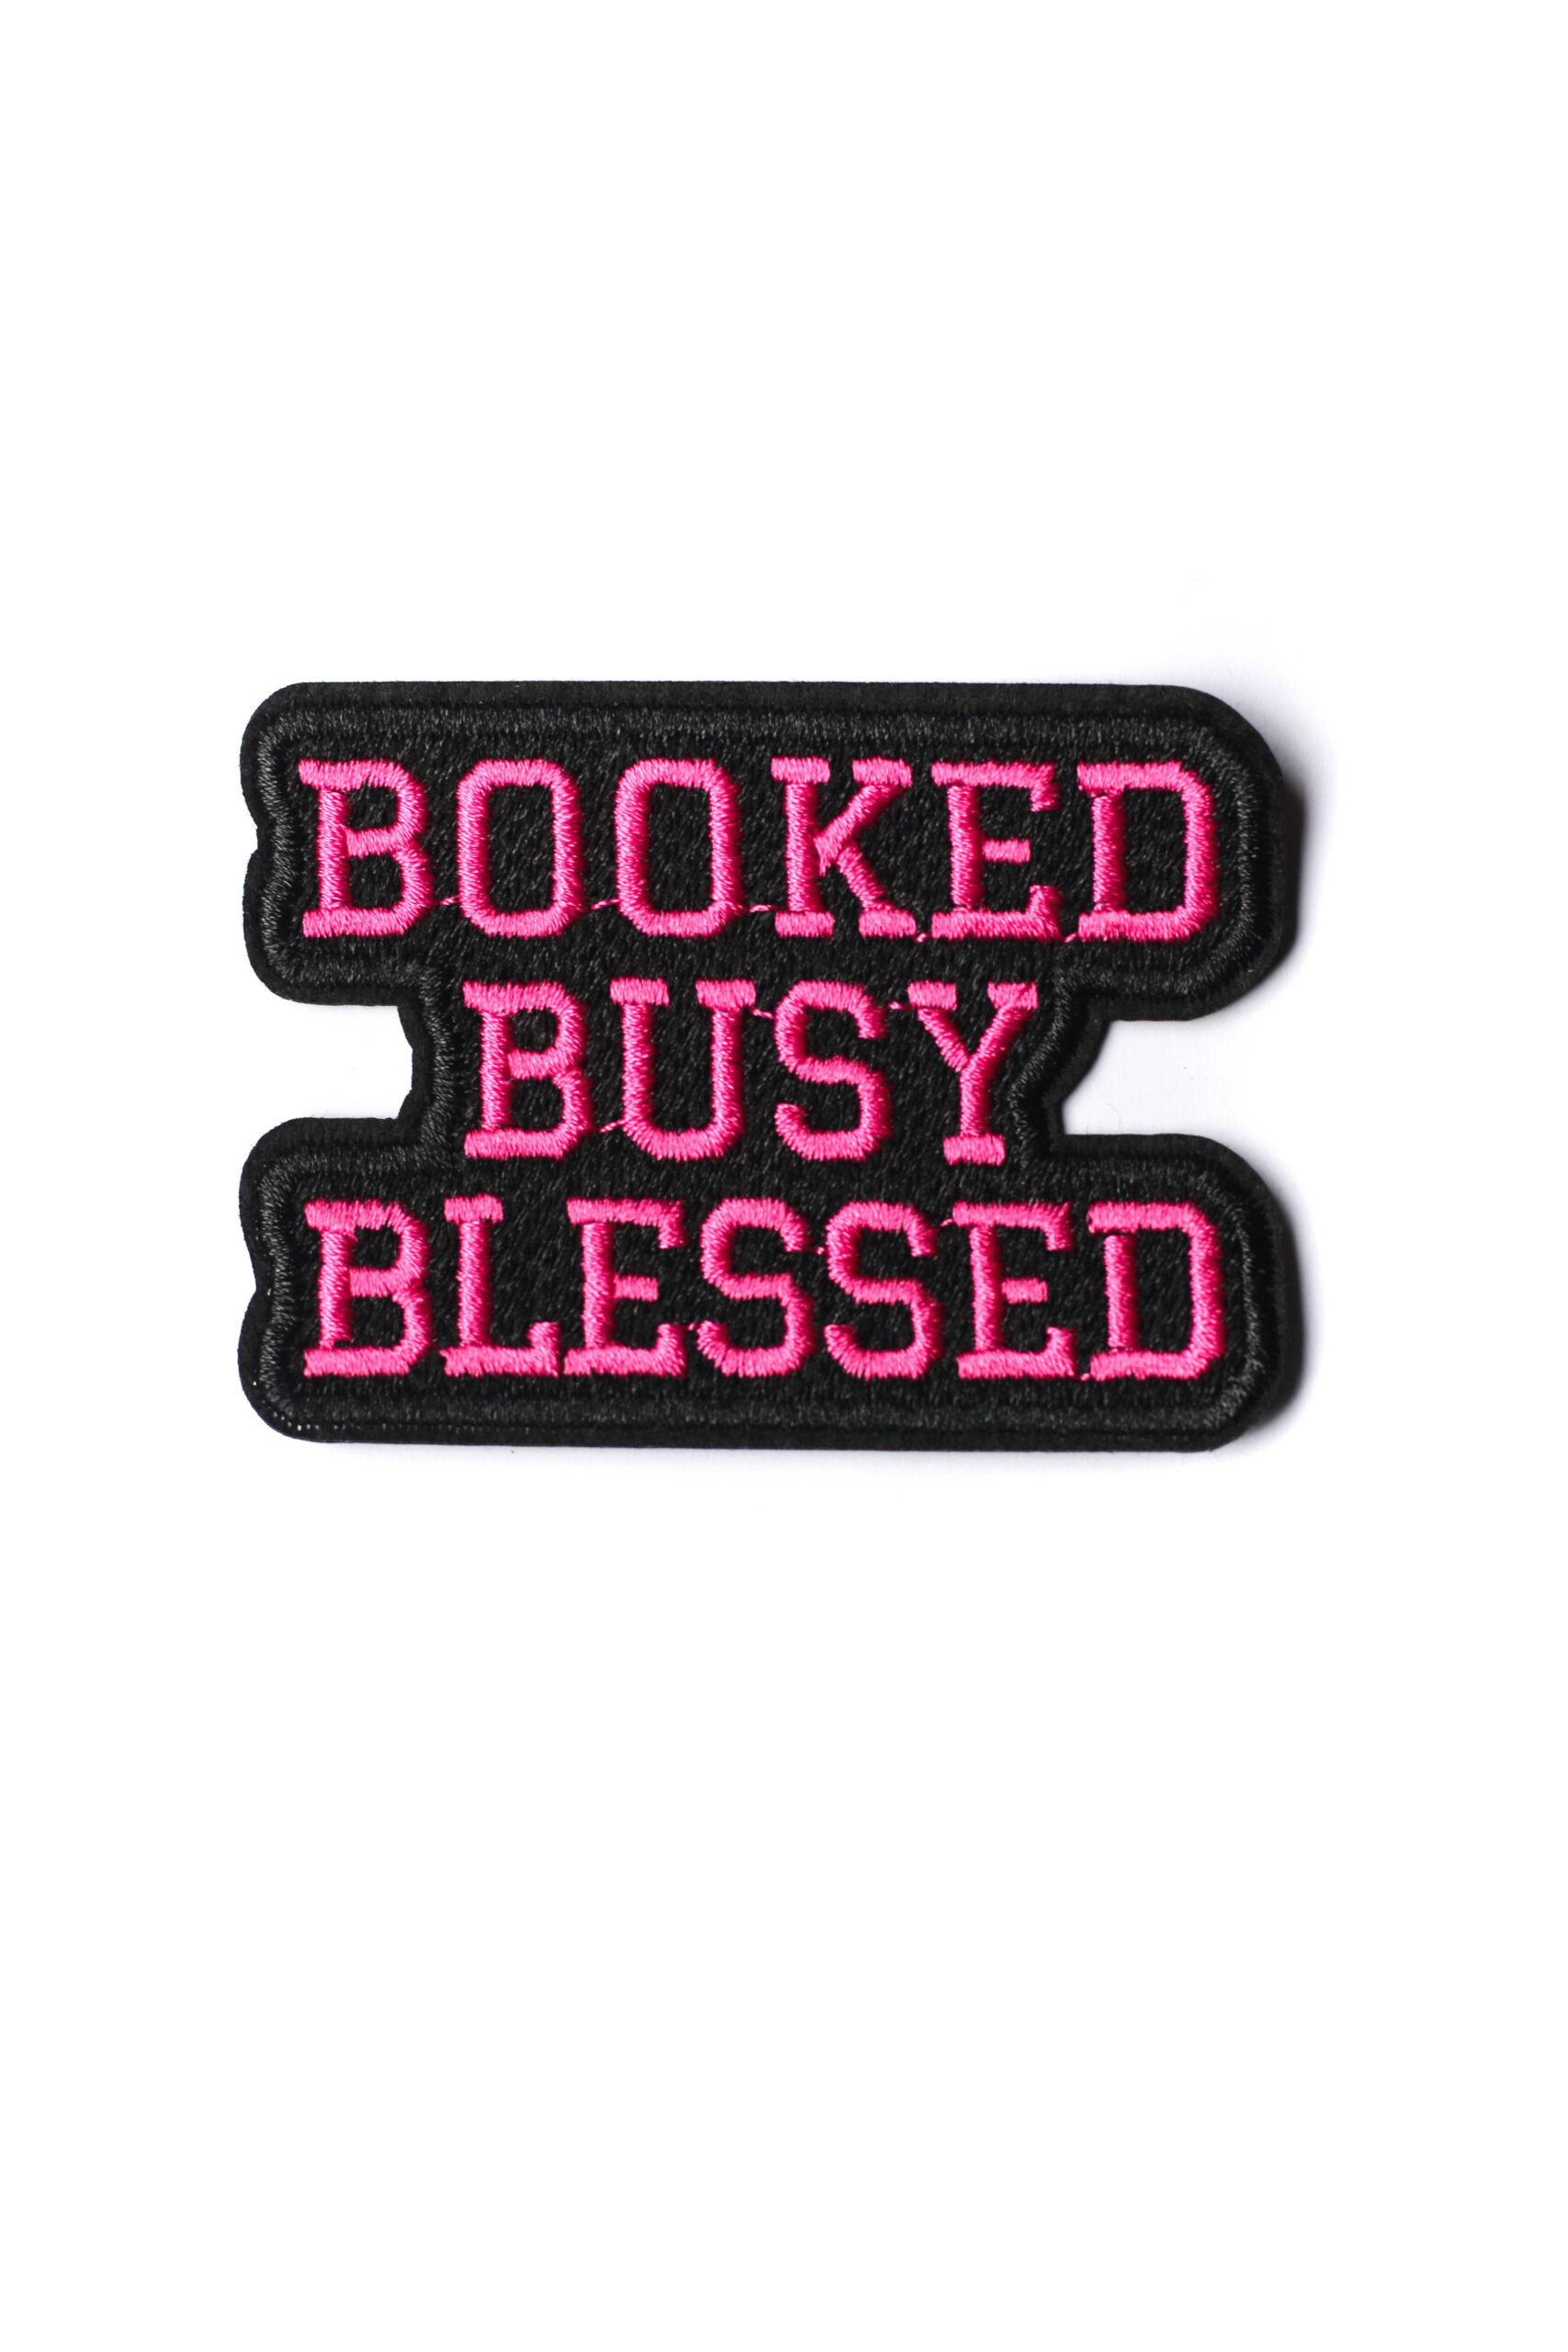 Booked busy blessed iron on embroidery patches